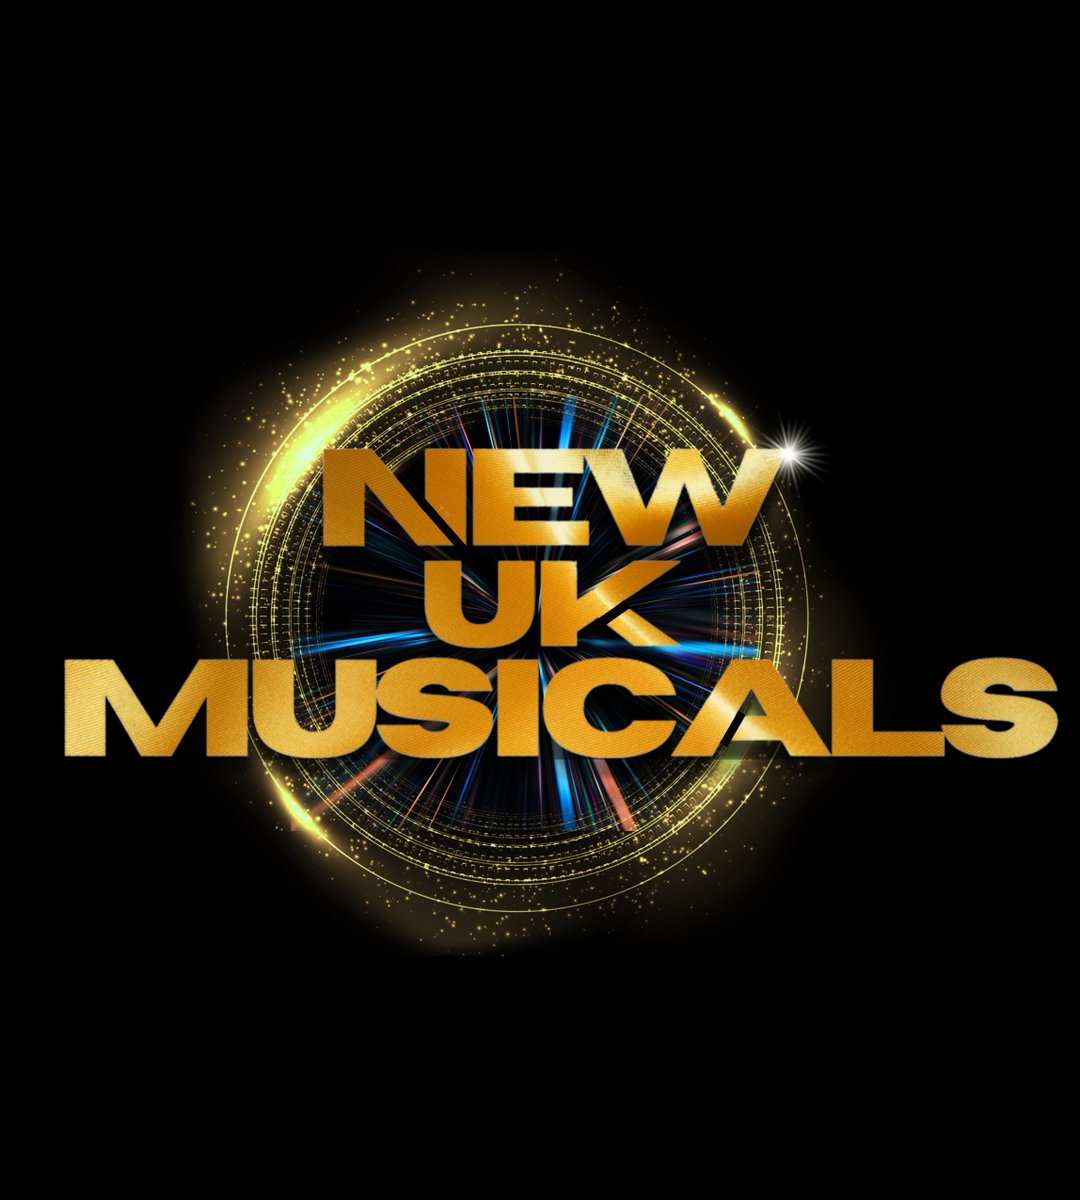 Why not treat yourself to some new musical theatre rep today? Freshen up that tired old audition folder with some of the amazing songs that new UK writers have been writing! newukmusicals.co.uk